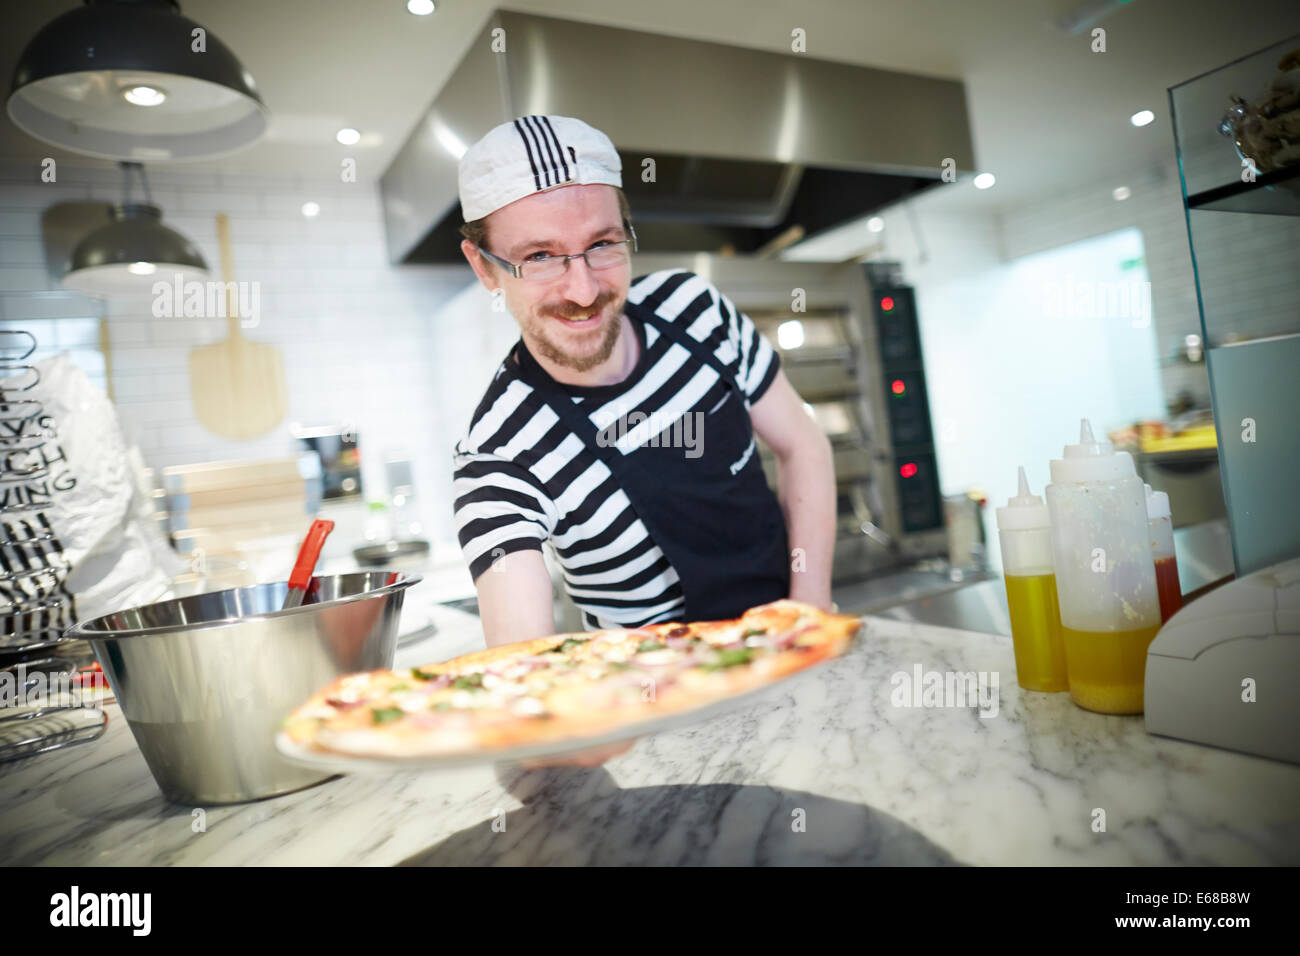 Pizza Express restaurant on king Street in Manchester UK Head Chef making the first pizza Stock Photo